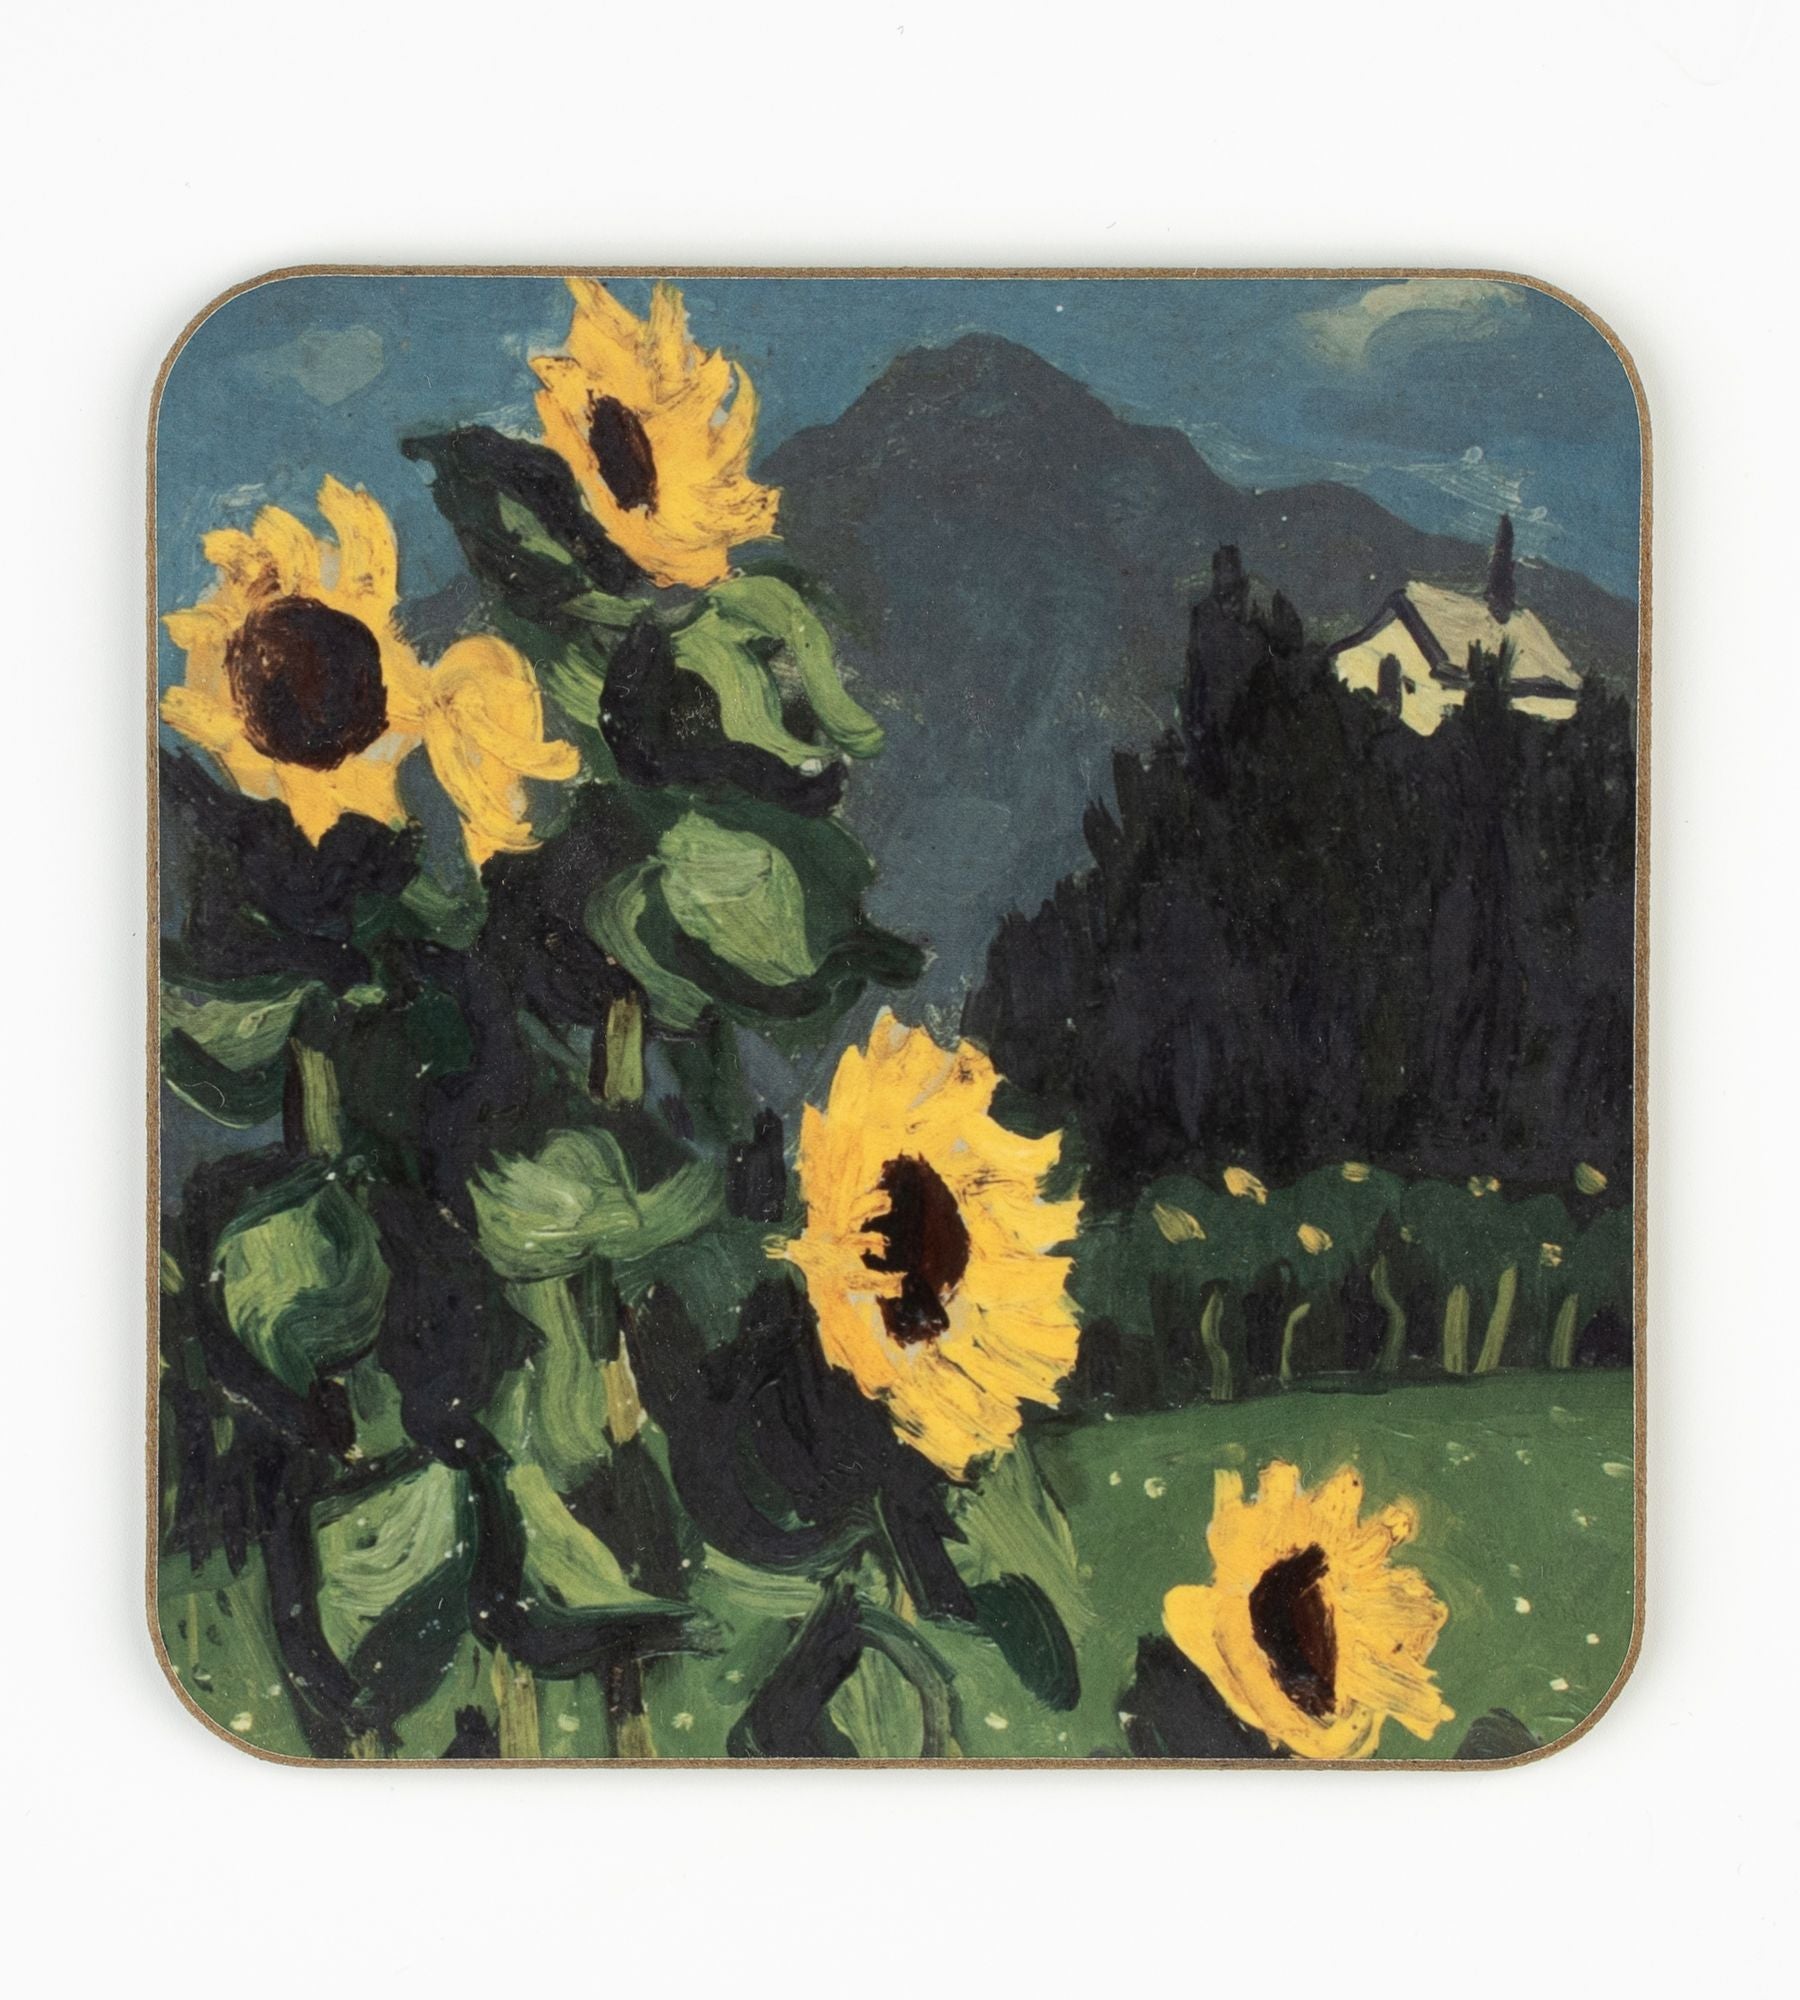 Sunflowers with mountains beyond - Syr Kyffin Williams Mat Diod